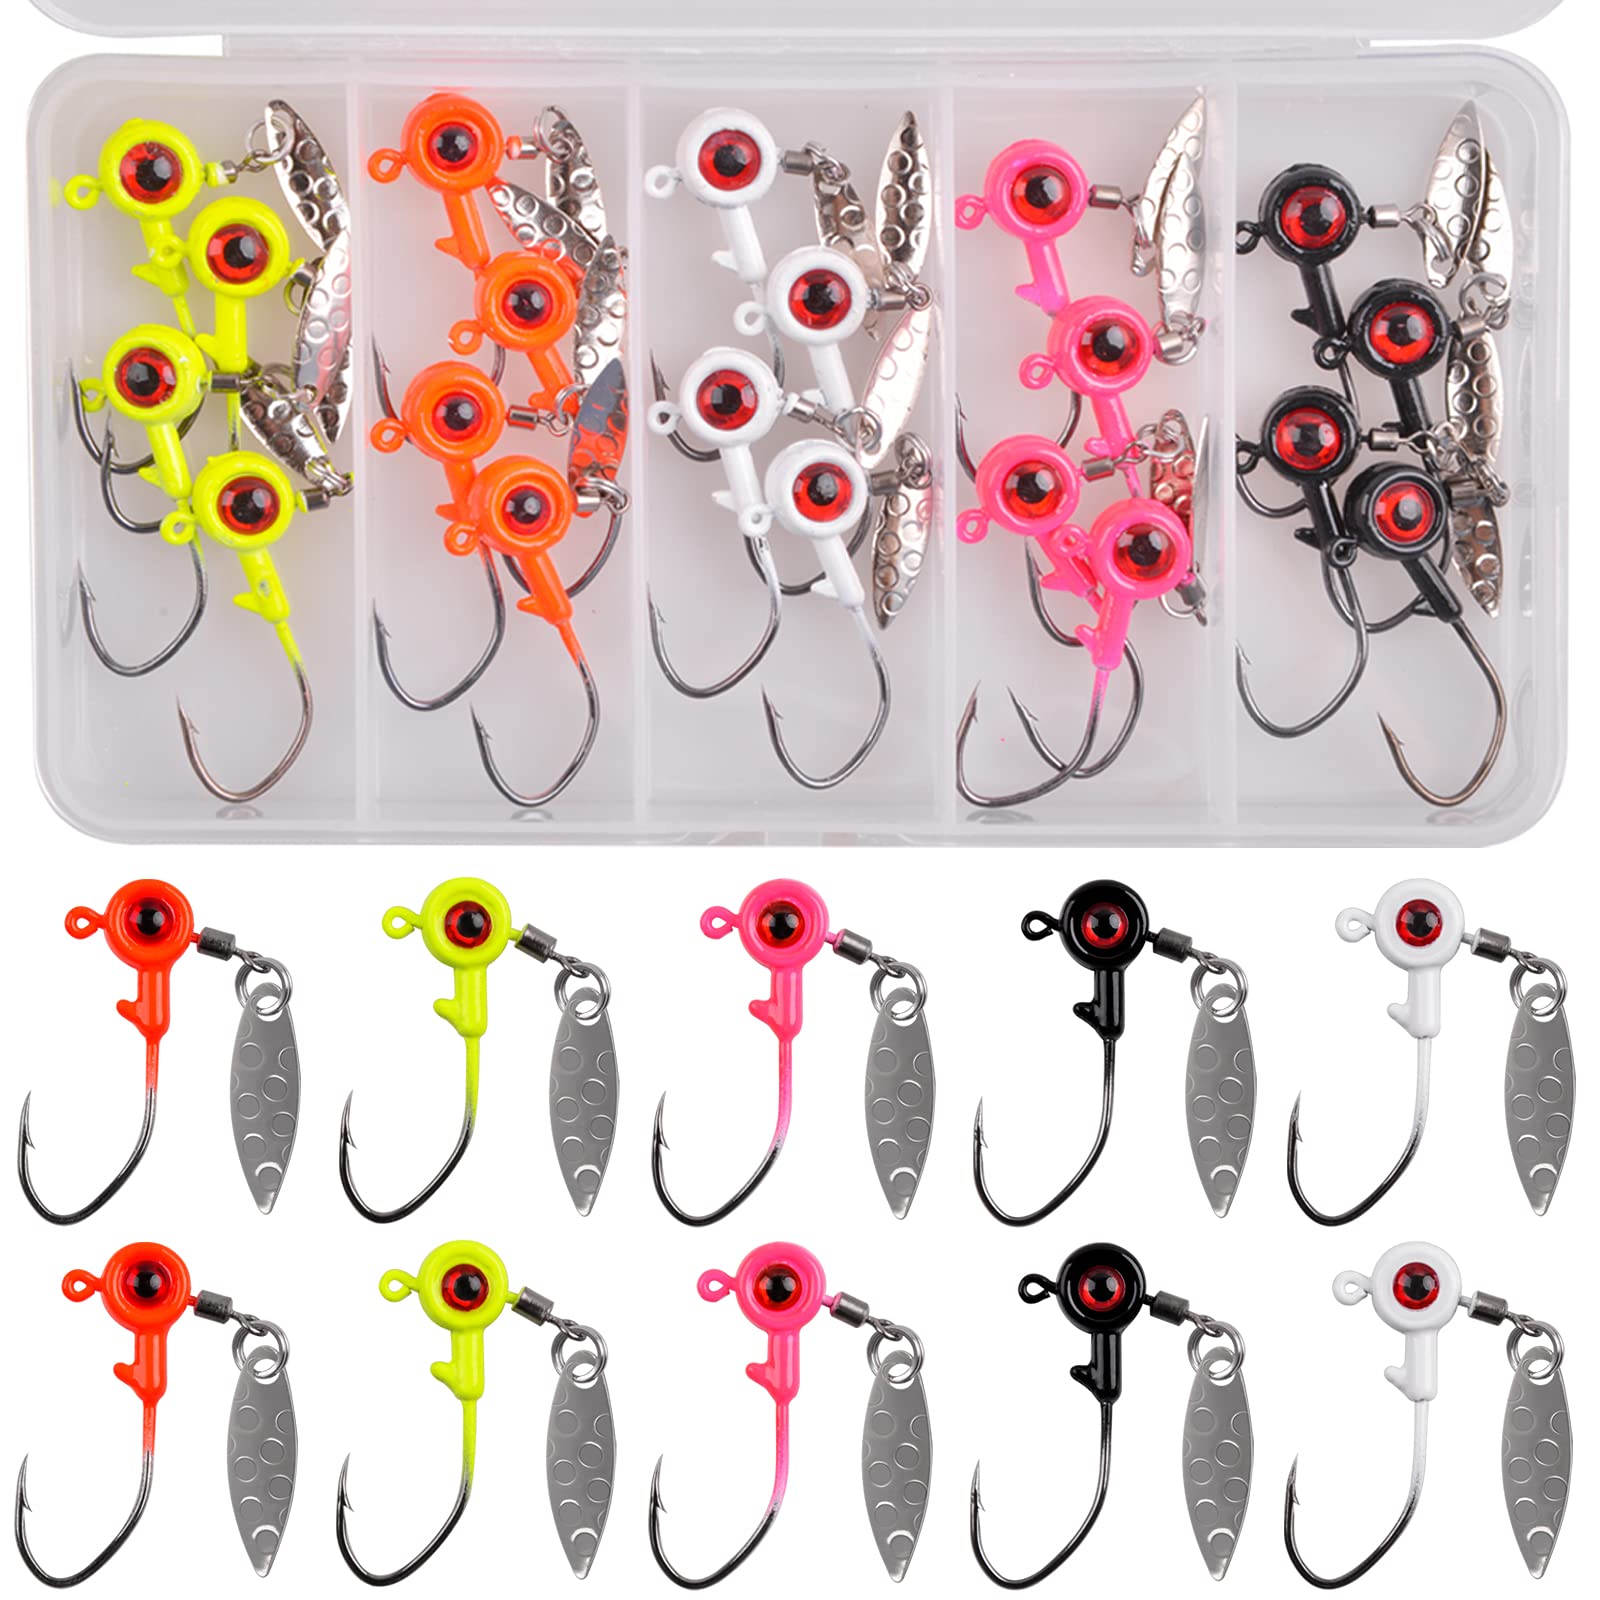 Underspin Swimbait Weighted Hooks, 10Pcs Underspin Jig Heads Swimbait Hooks  with Spinner Blade Twist Lock Weighted Fishing Hook for Soft Lures